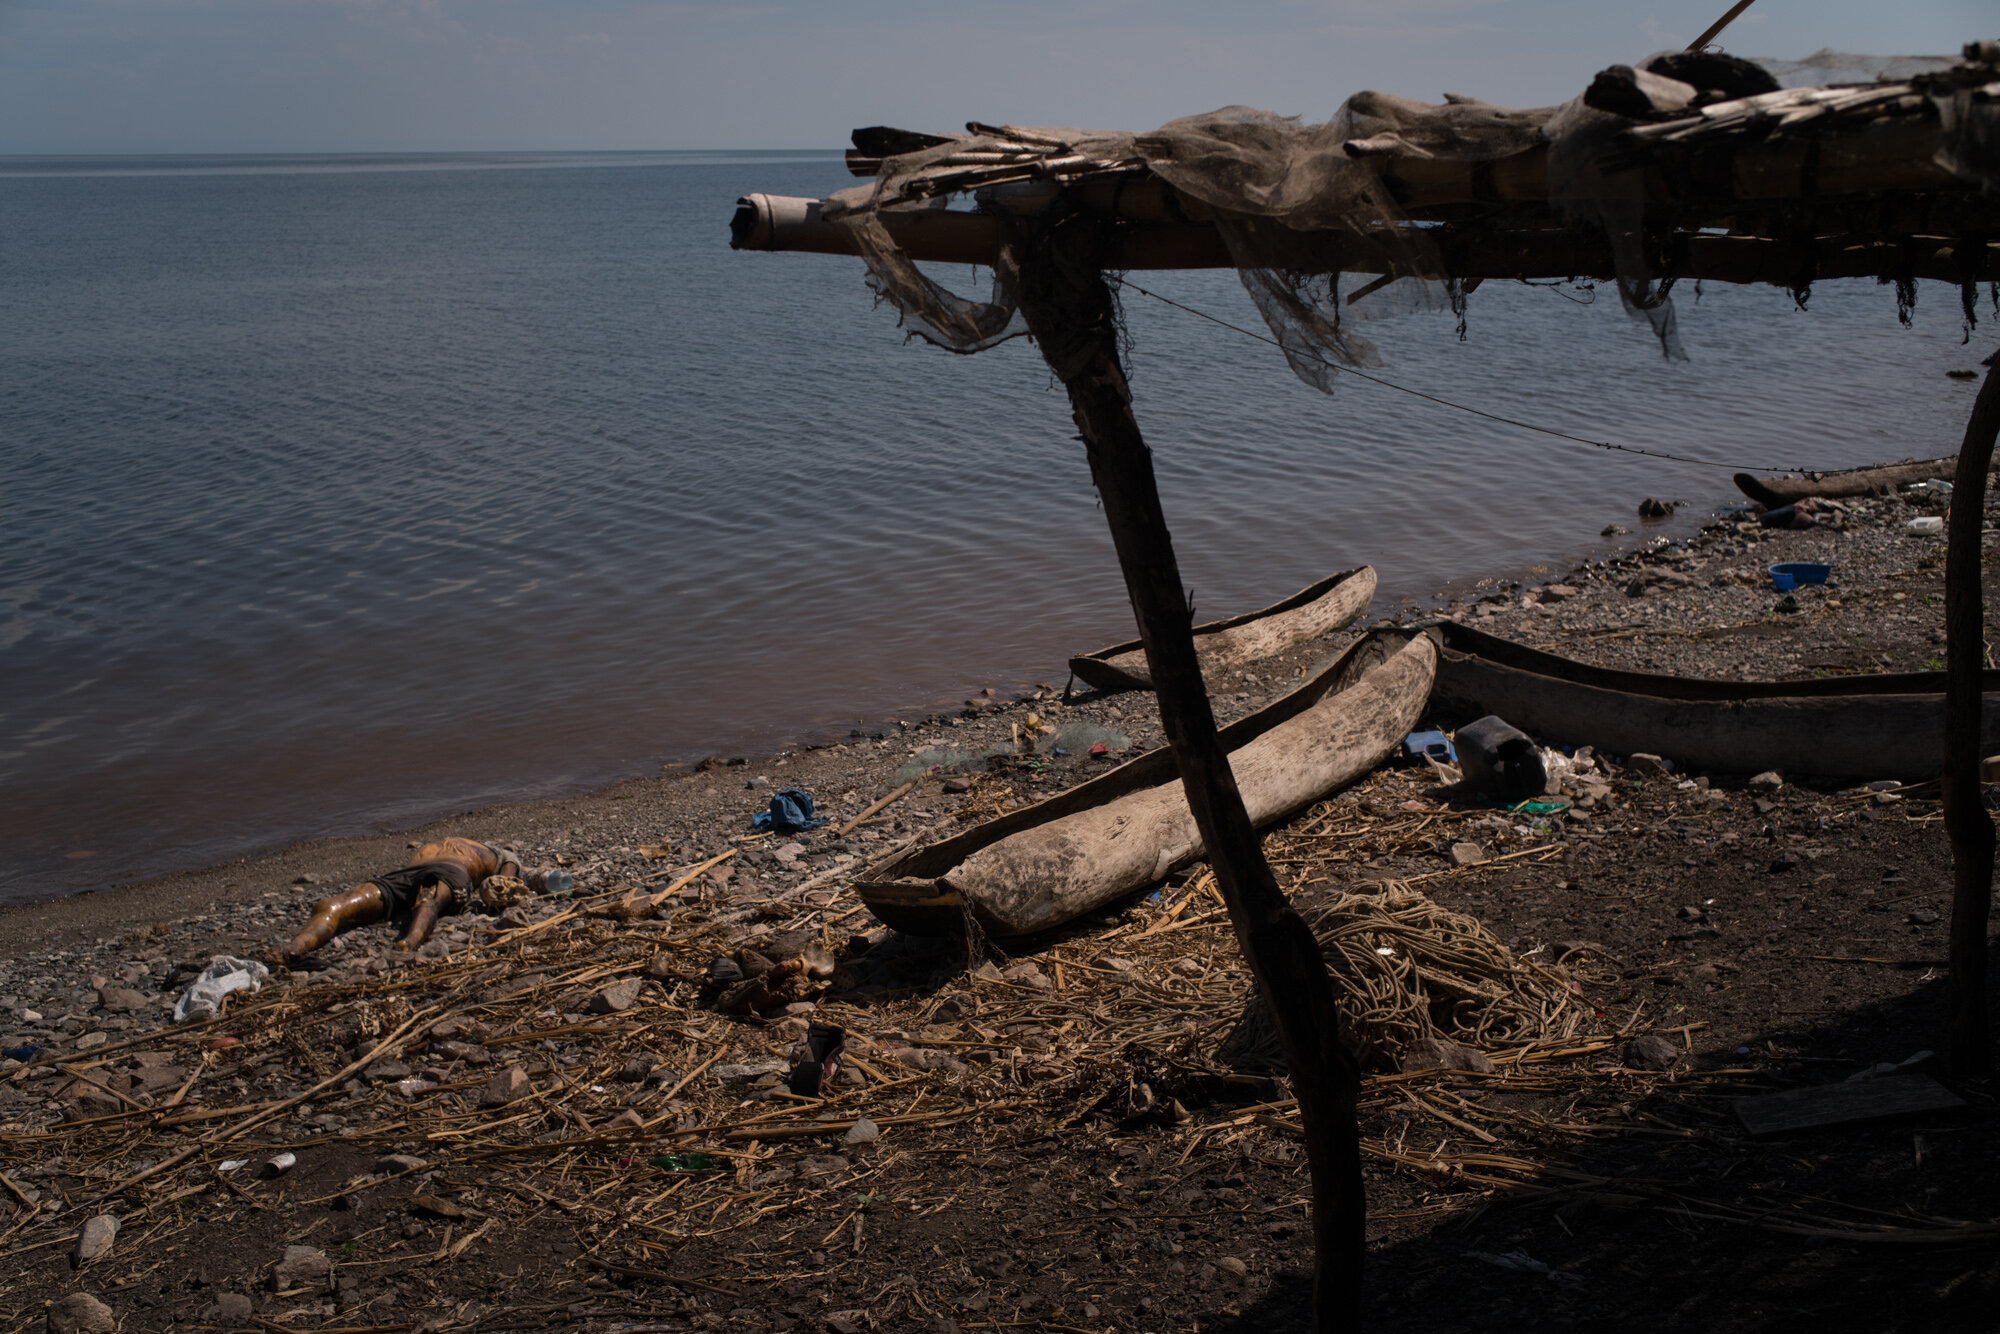  Cadavers line the lakeshore in Joo, one of the villages that was attacked on March 12, leaving reportedly 42 people massacred. This is the body of Justin, 47, a fisherman. The location of the villages - wedged between Lake Albert and mountains - mak